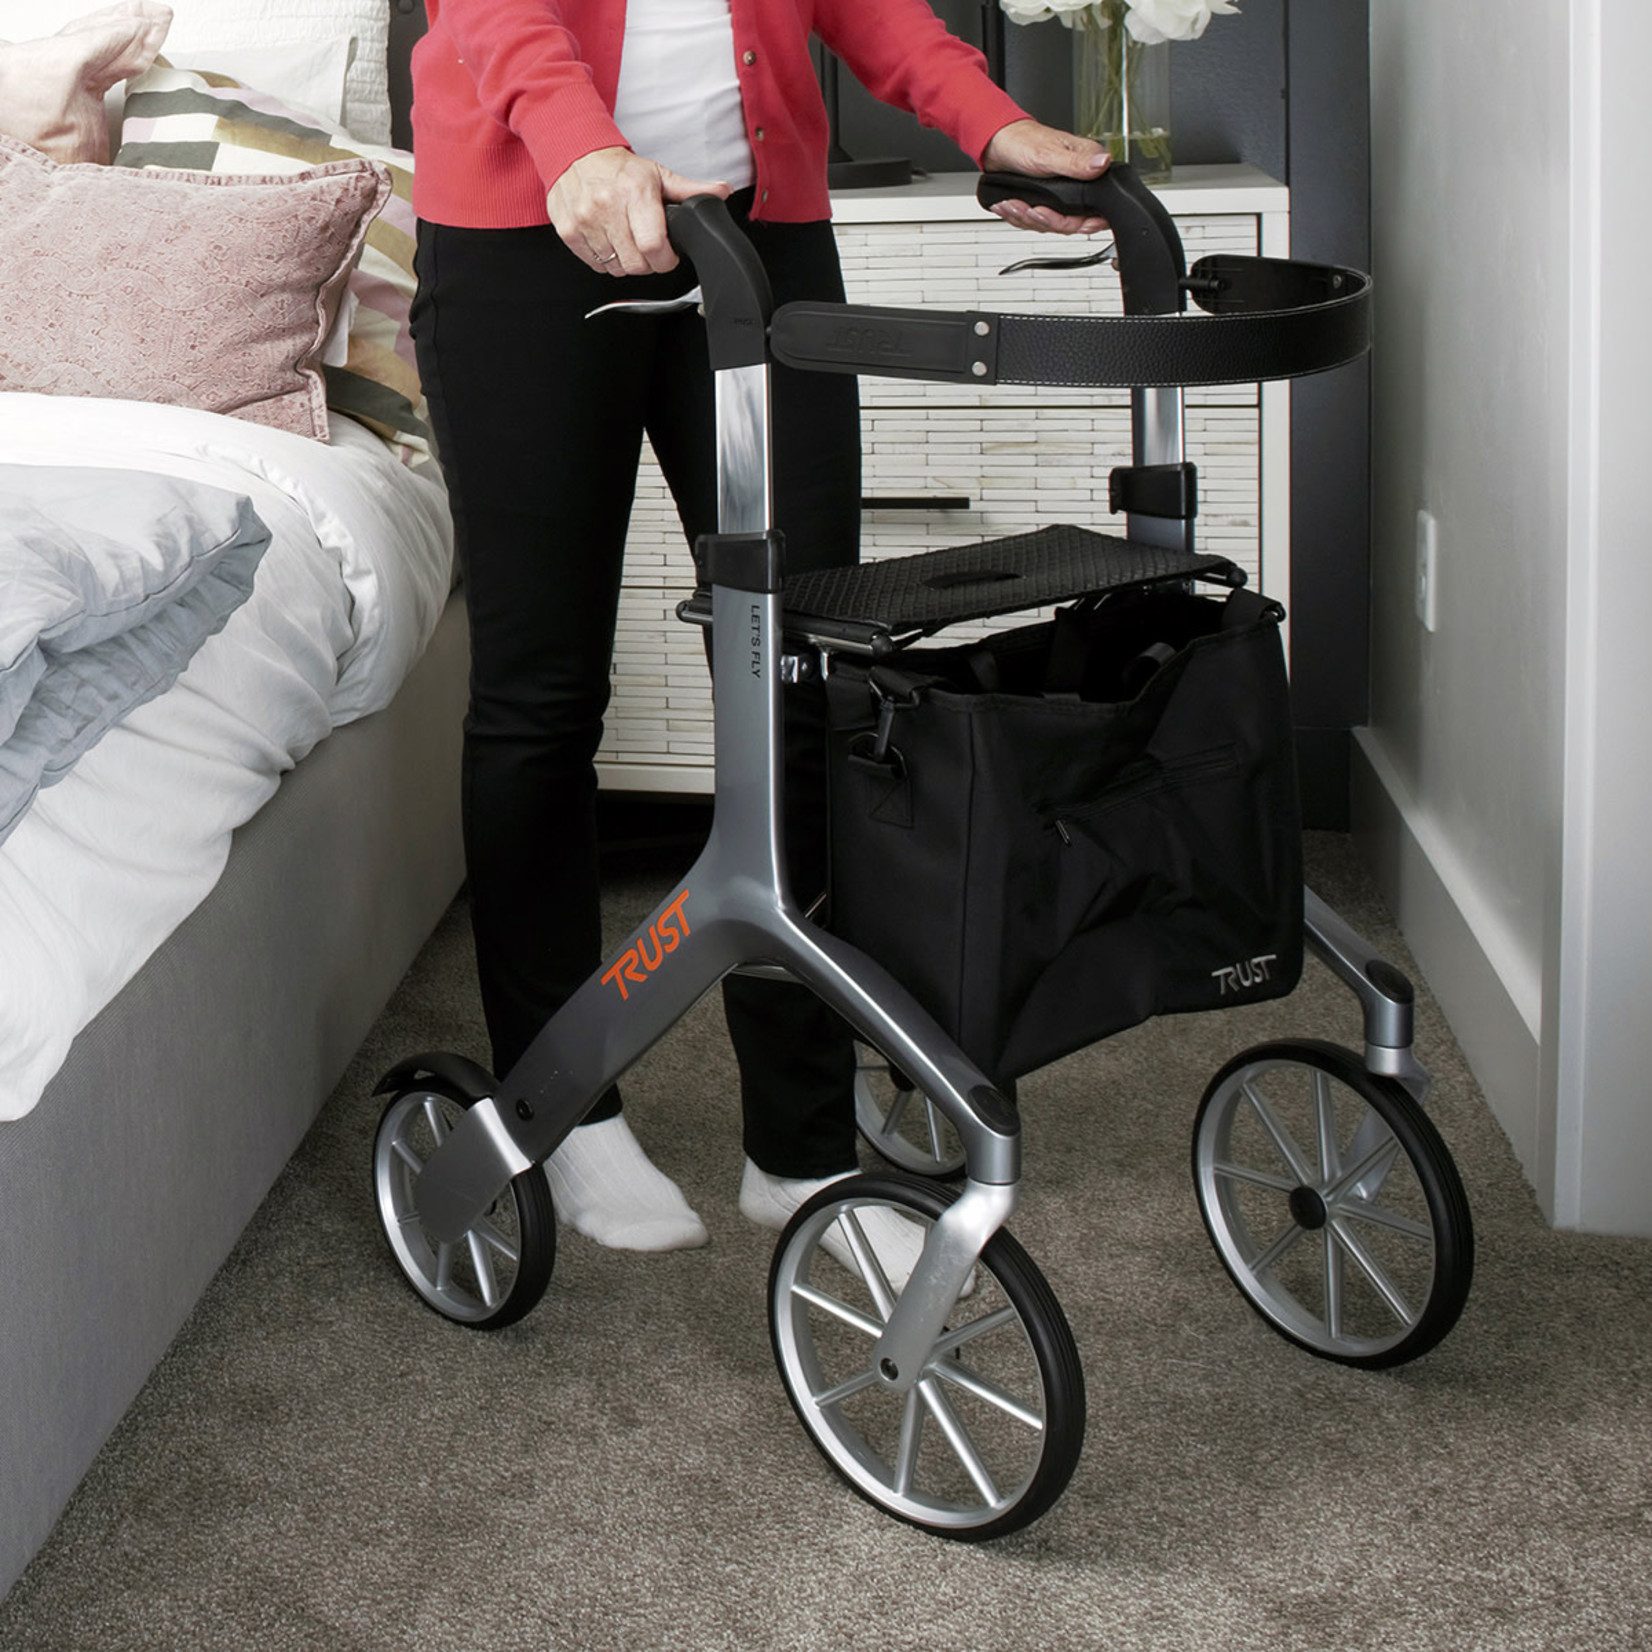 TrustCare Let's Fly Rollator